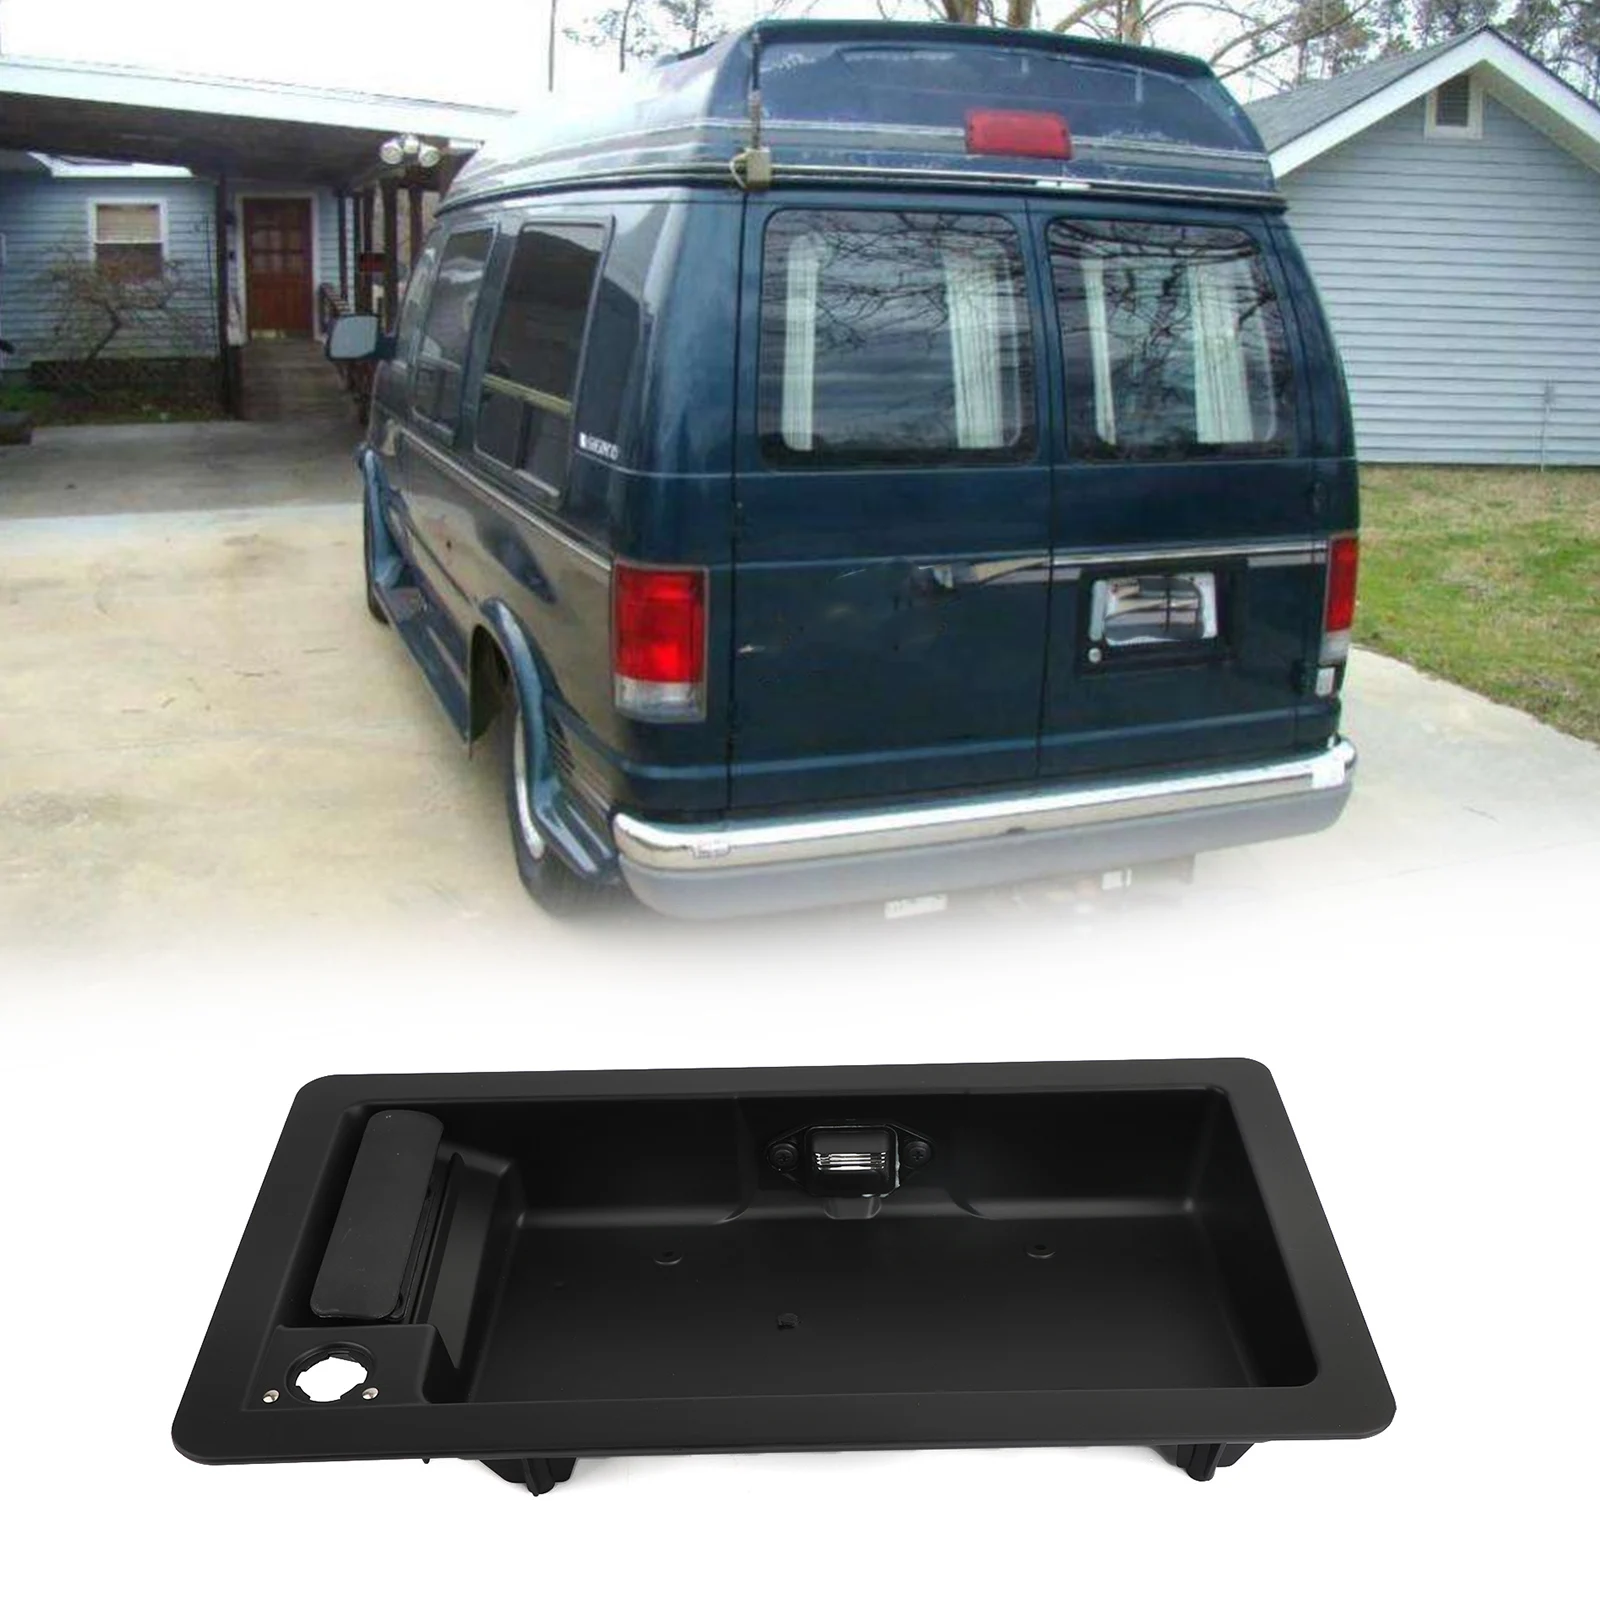 

Areyourshop Fits For Ford Van E150 E250 E350 Rear Cargo Door Handle & License Plate Tag Bracket, Black